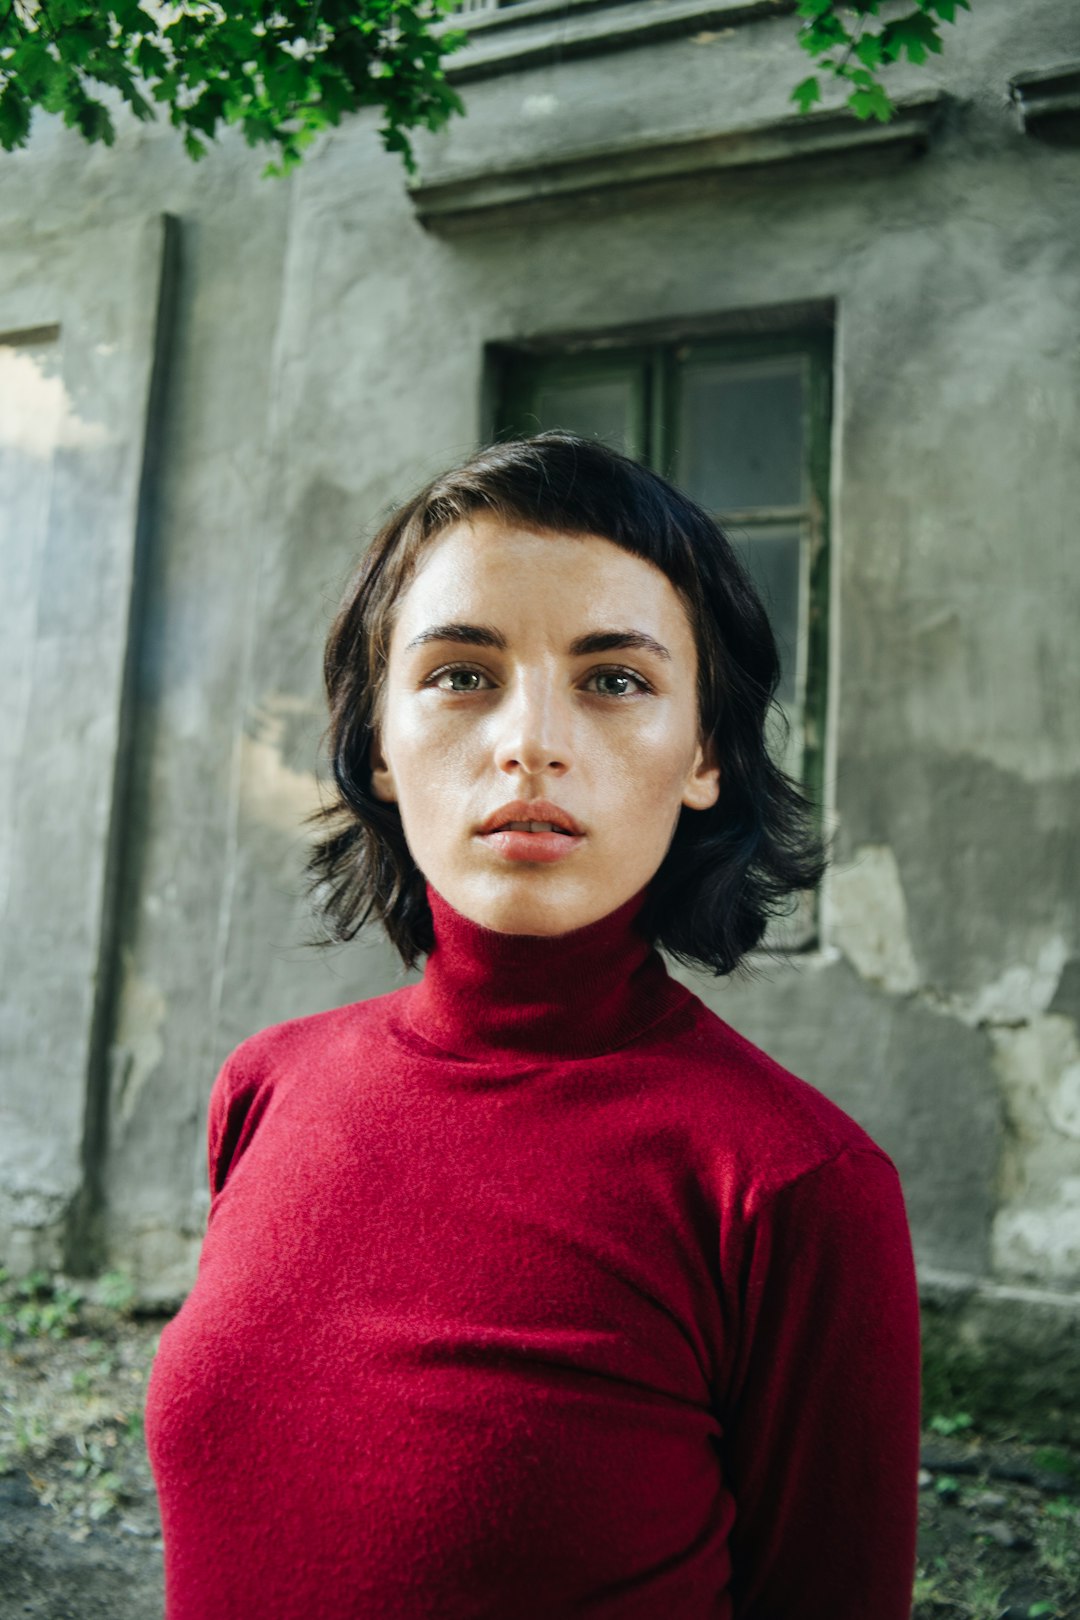 woman in red turtleneck sweater standing beside gray concrete wall